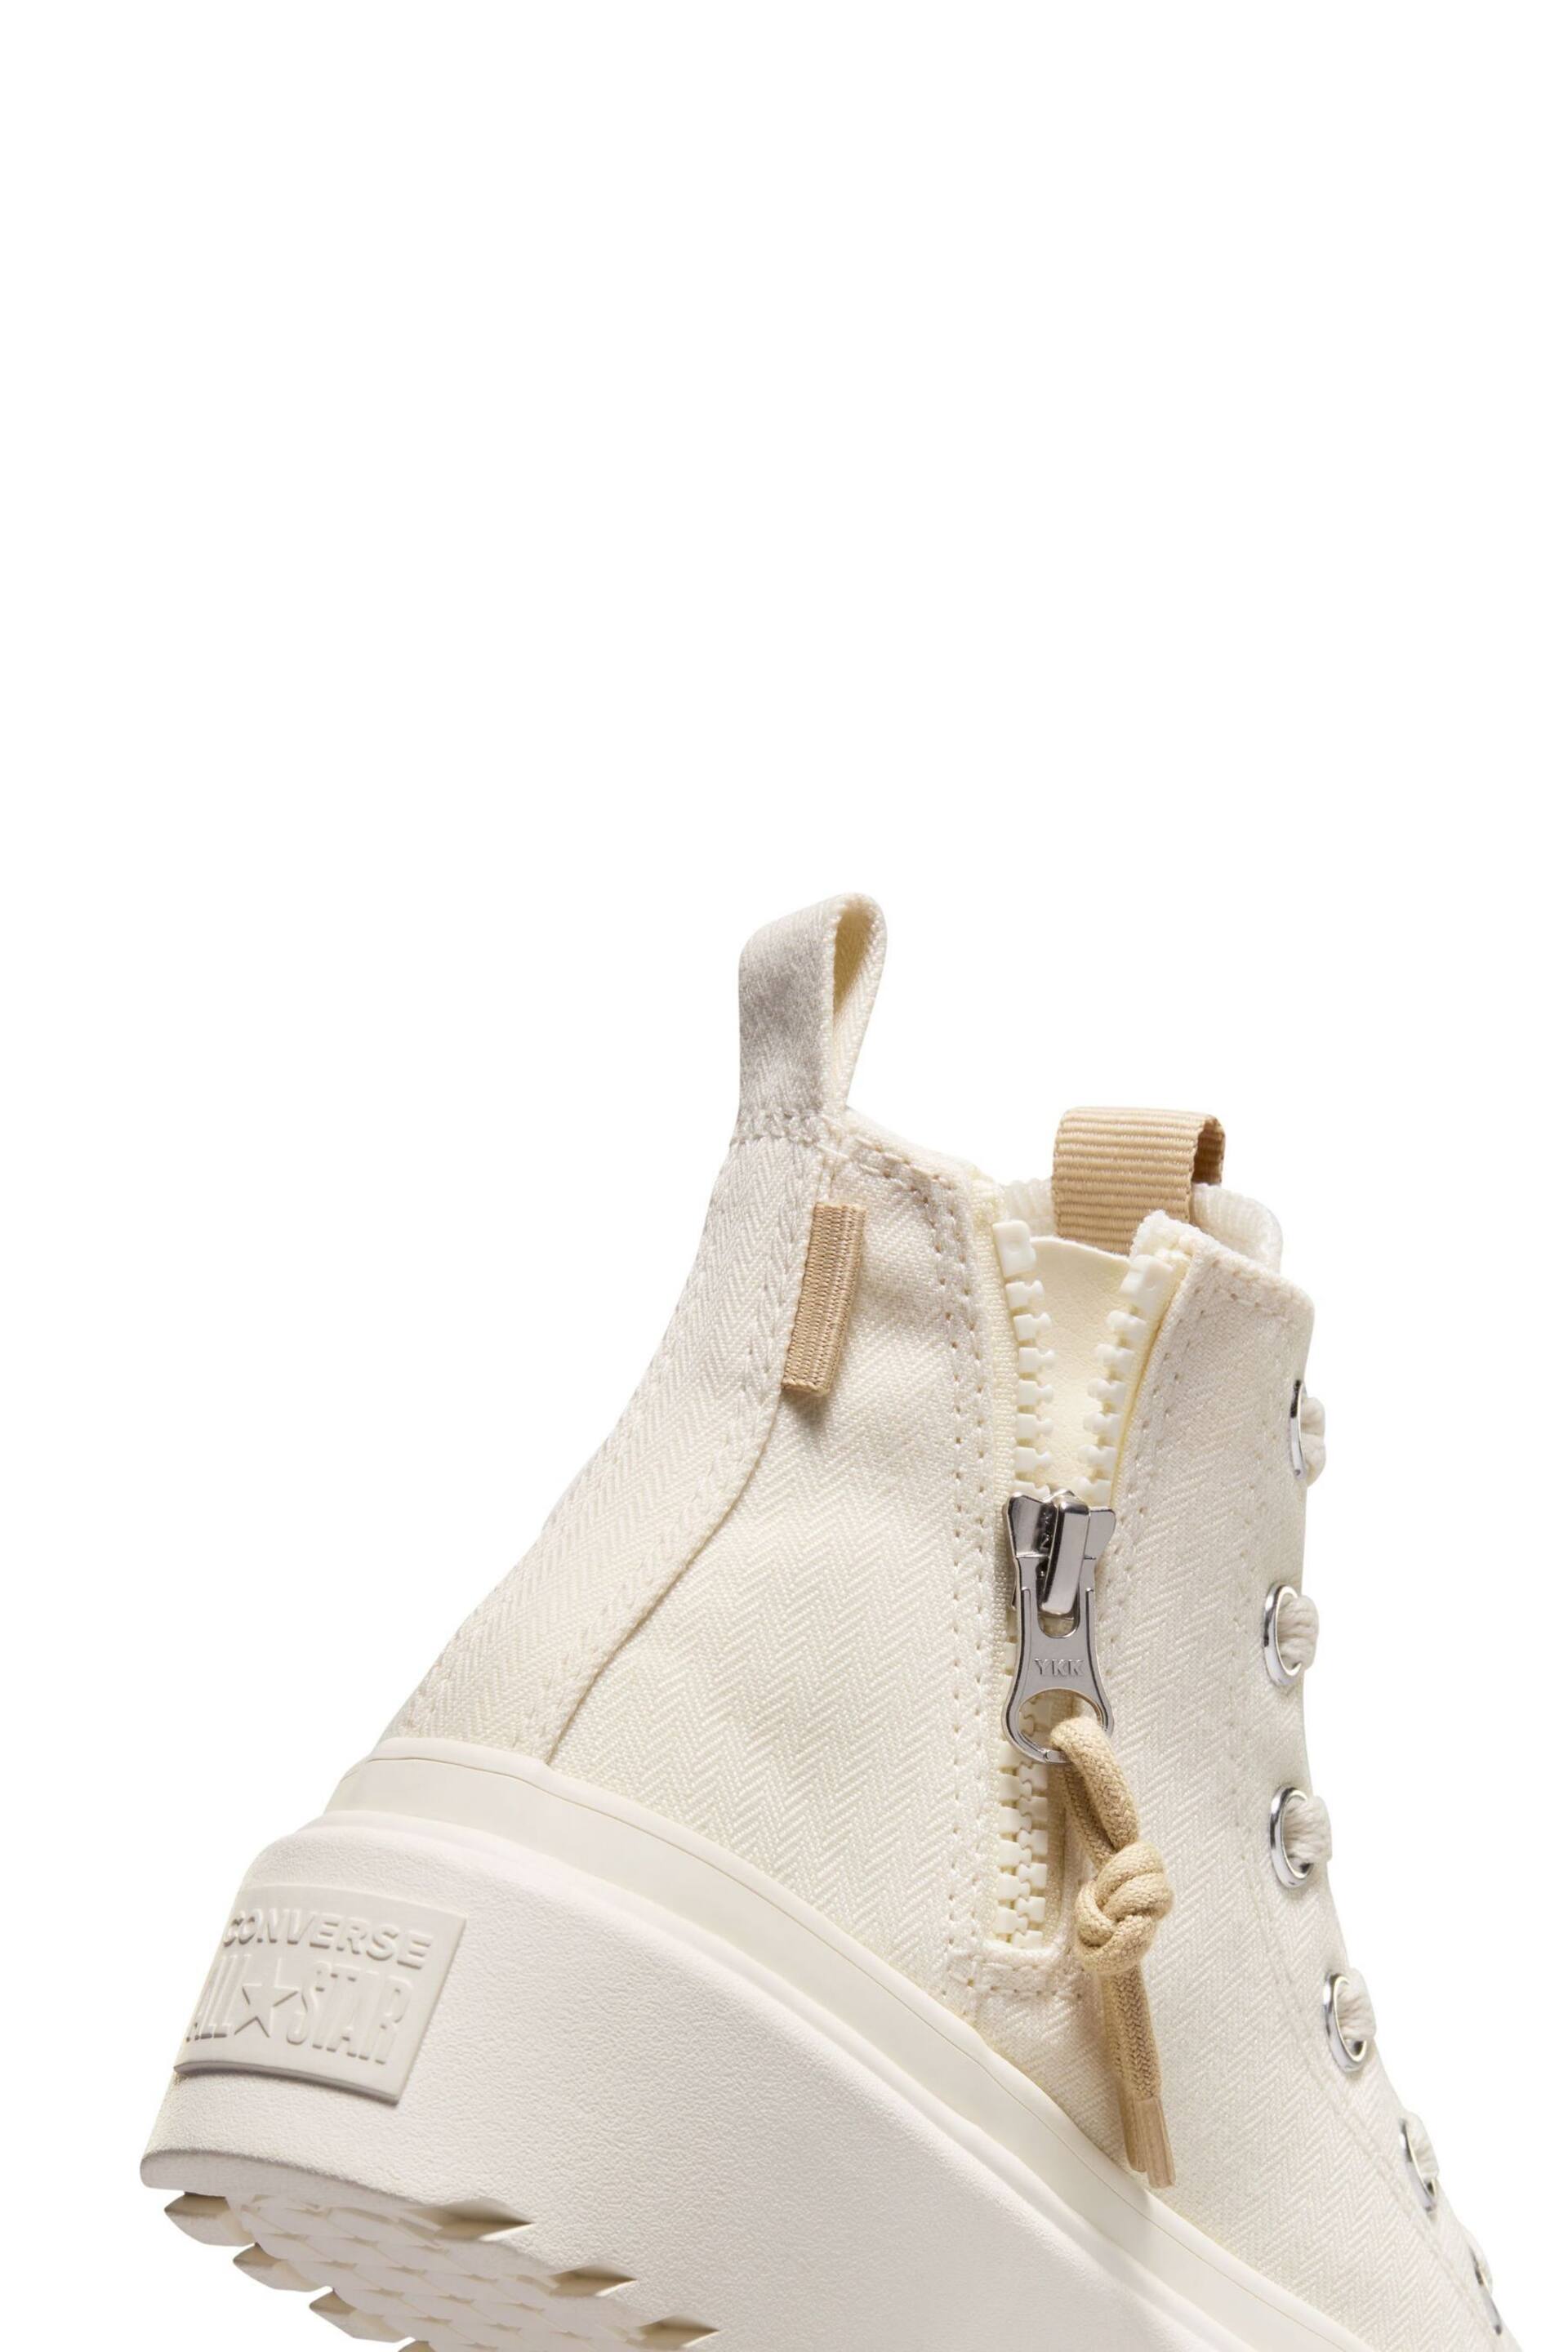 Converse Cream Lugged Lift Junior Trainers - Image 10 of 10